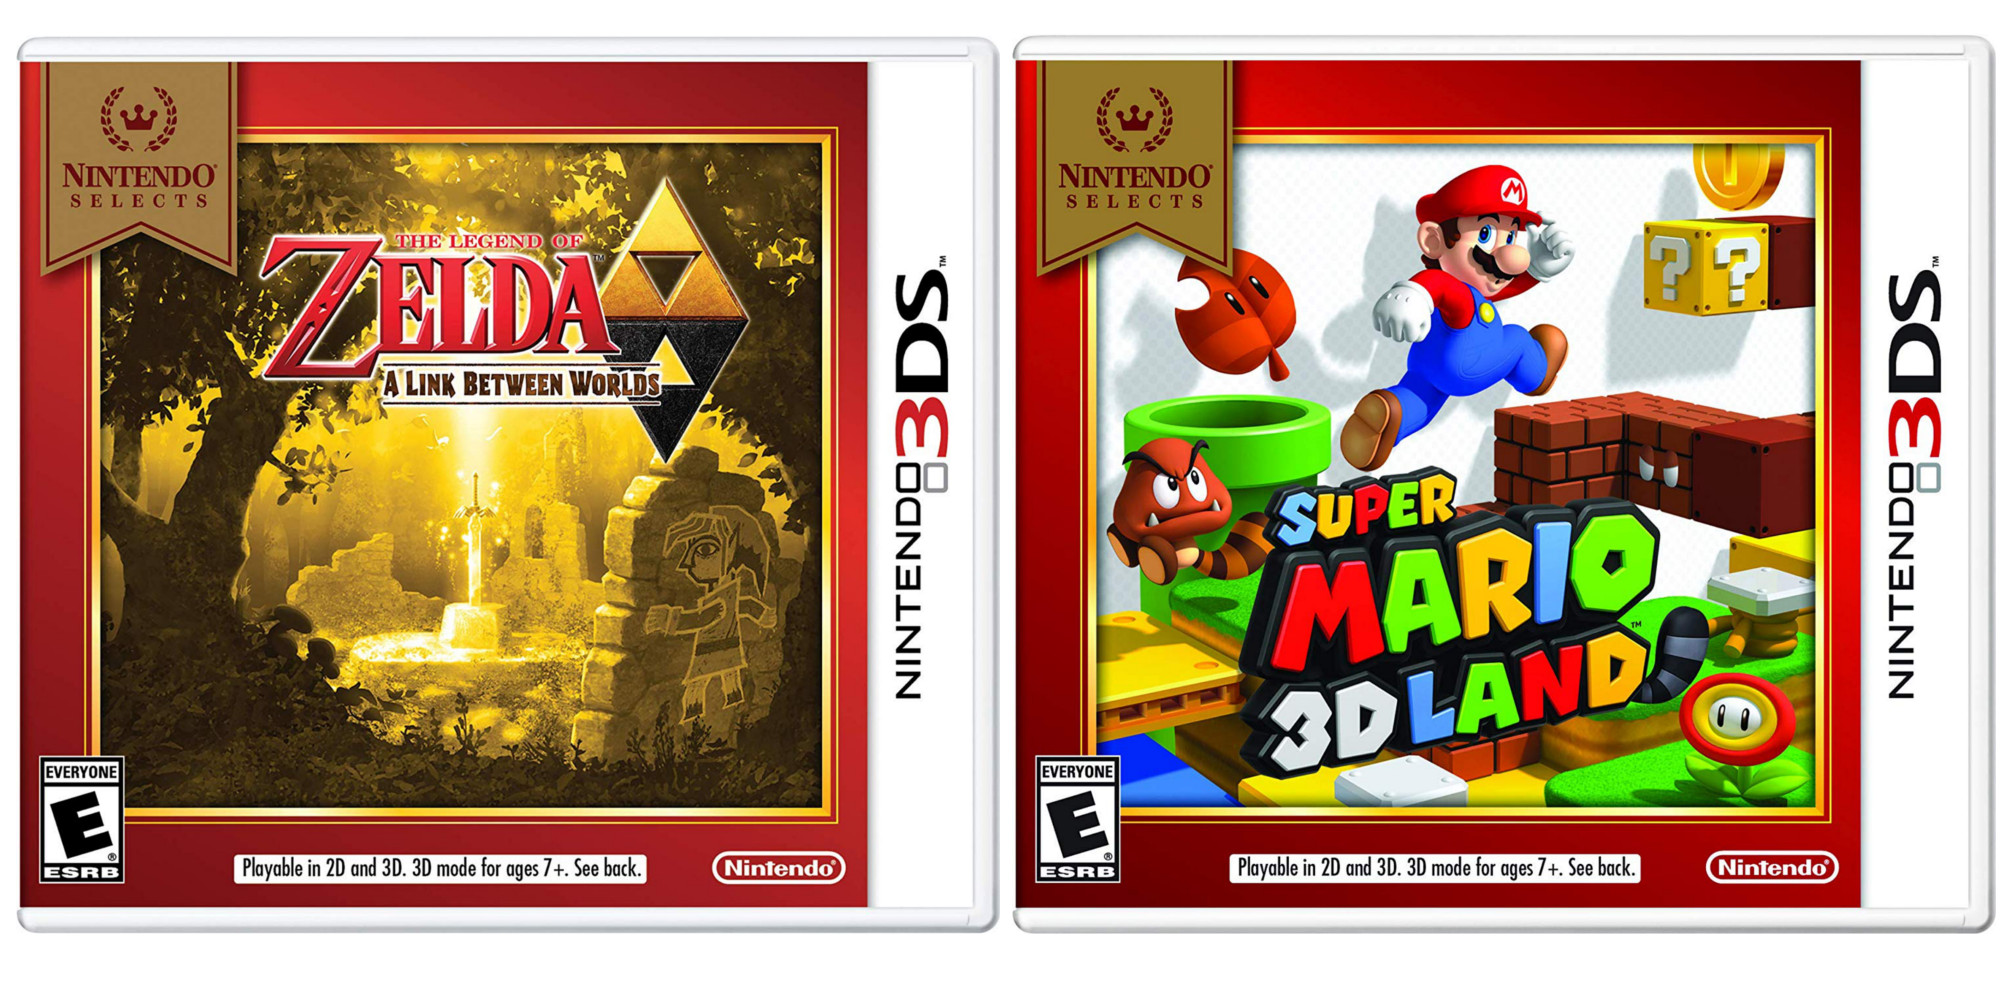 Nintendo 3DS games from 15 Ocarina of Time, Mario Maker, many more